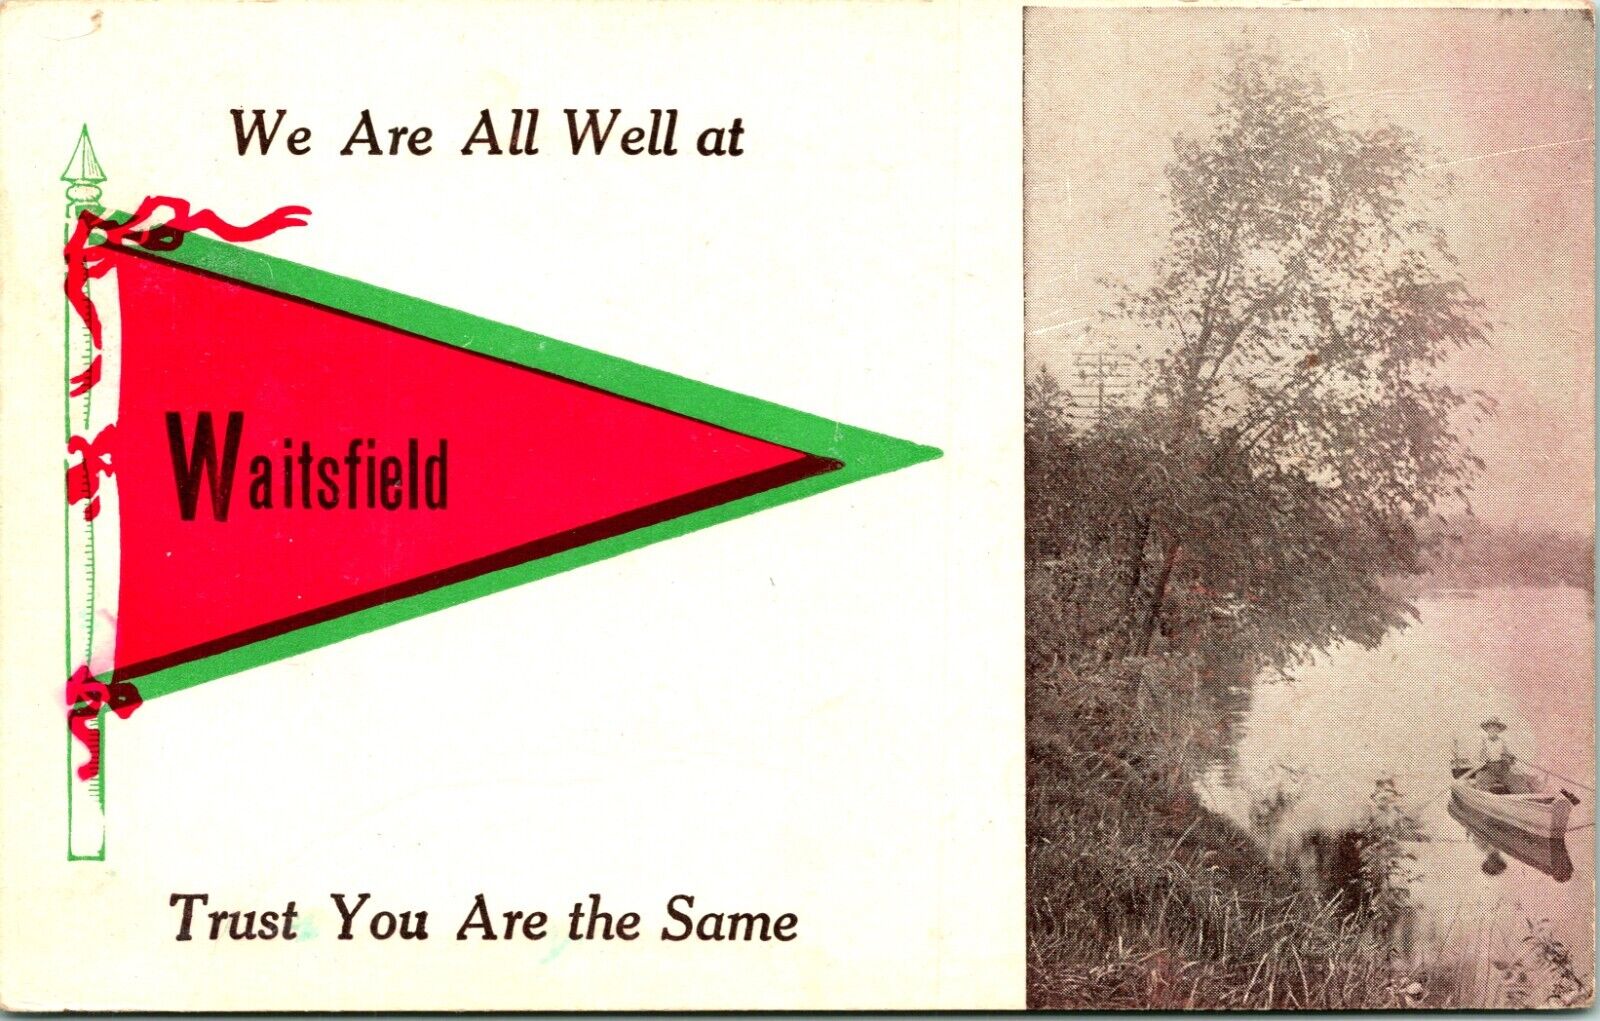 C.1920\'S POSTCARD WE ARE ALL WELL AT WAITSFIELD, VERMONT TRUST YOU ARE THE SAME